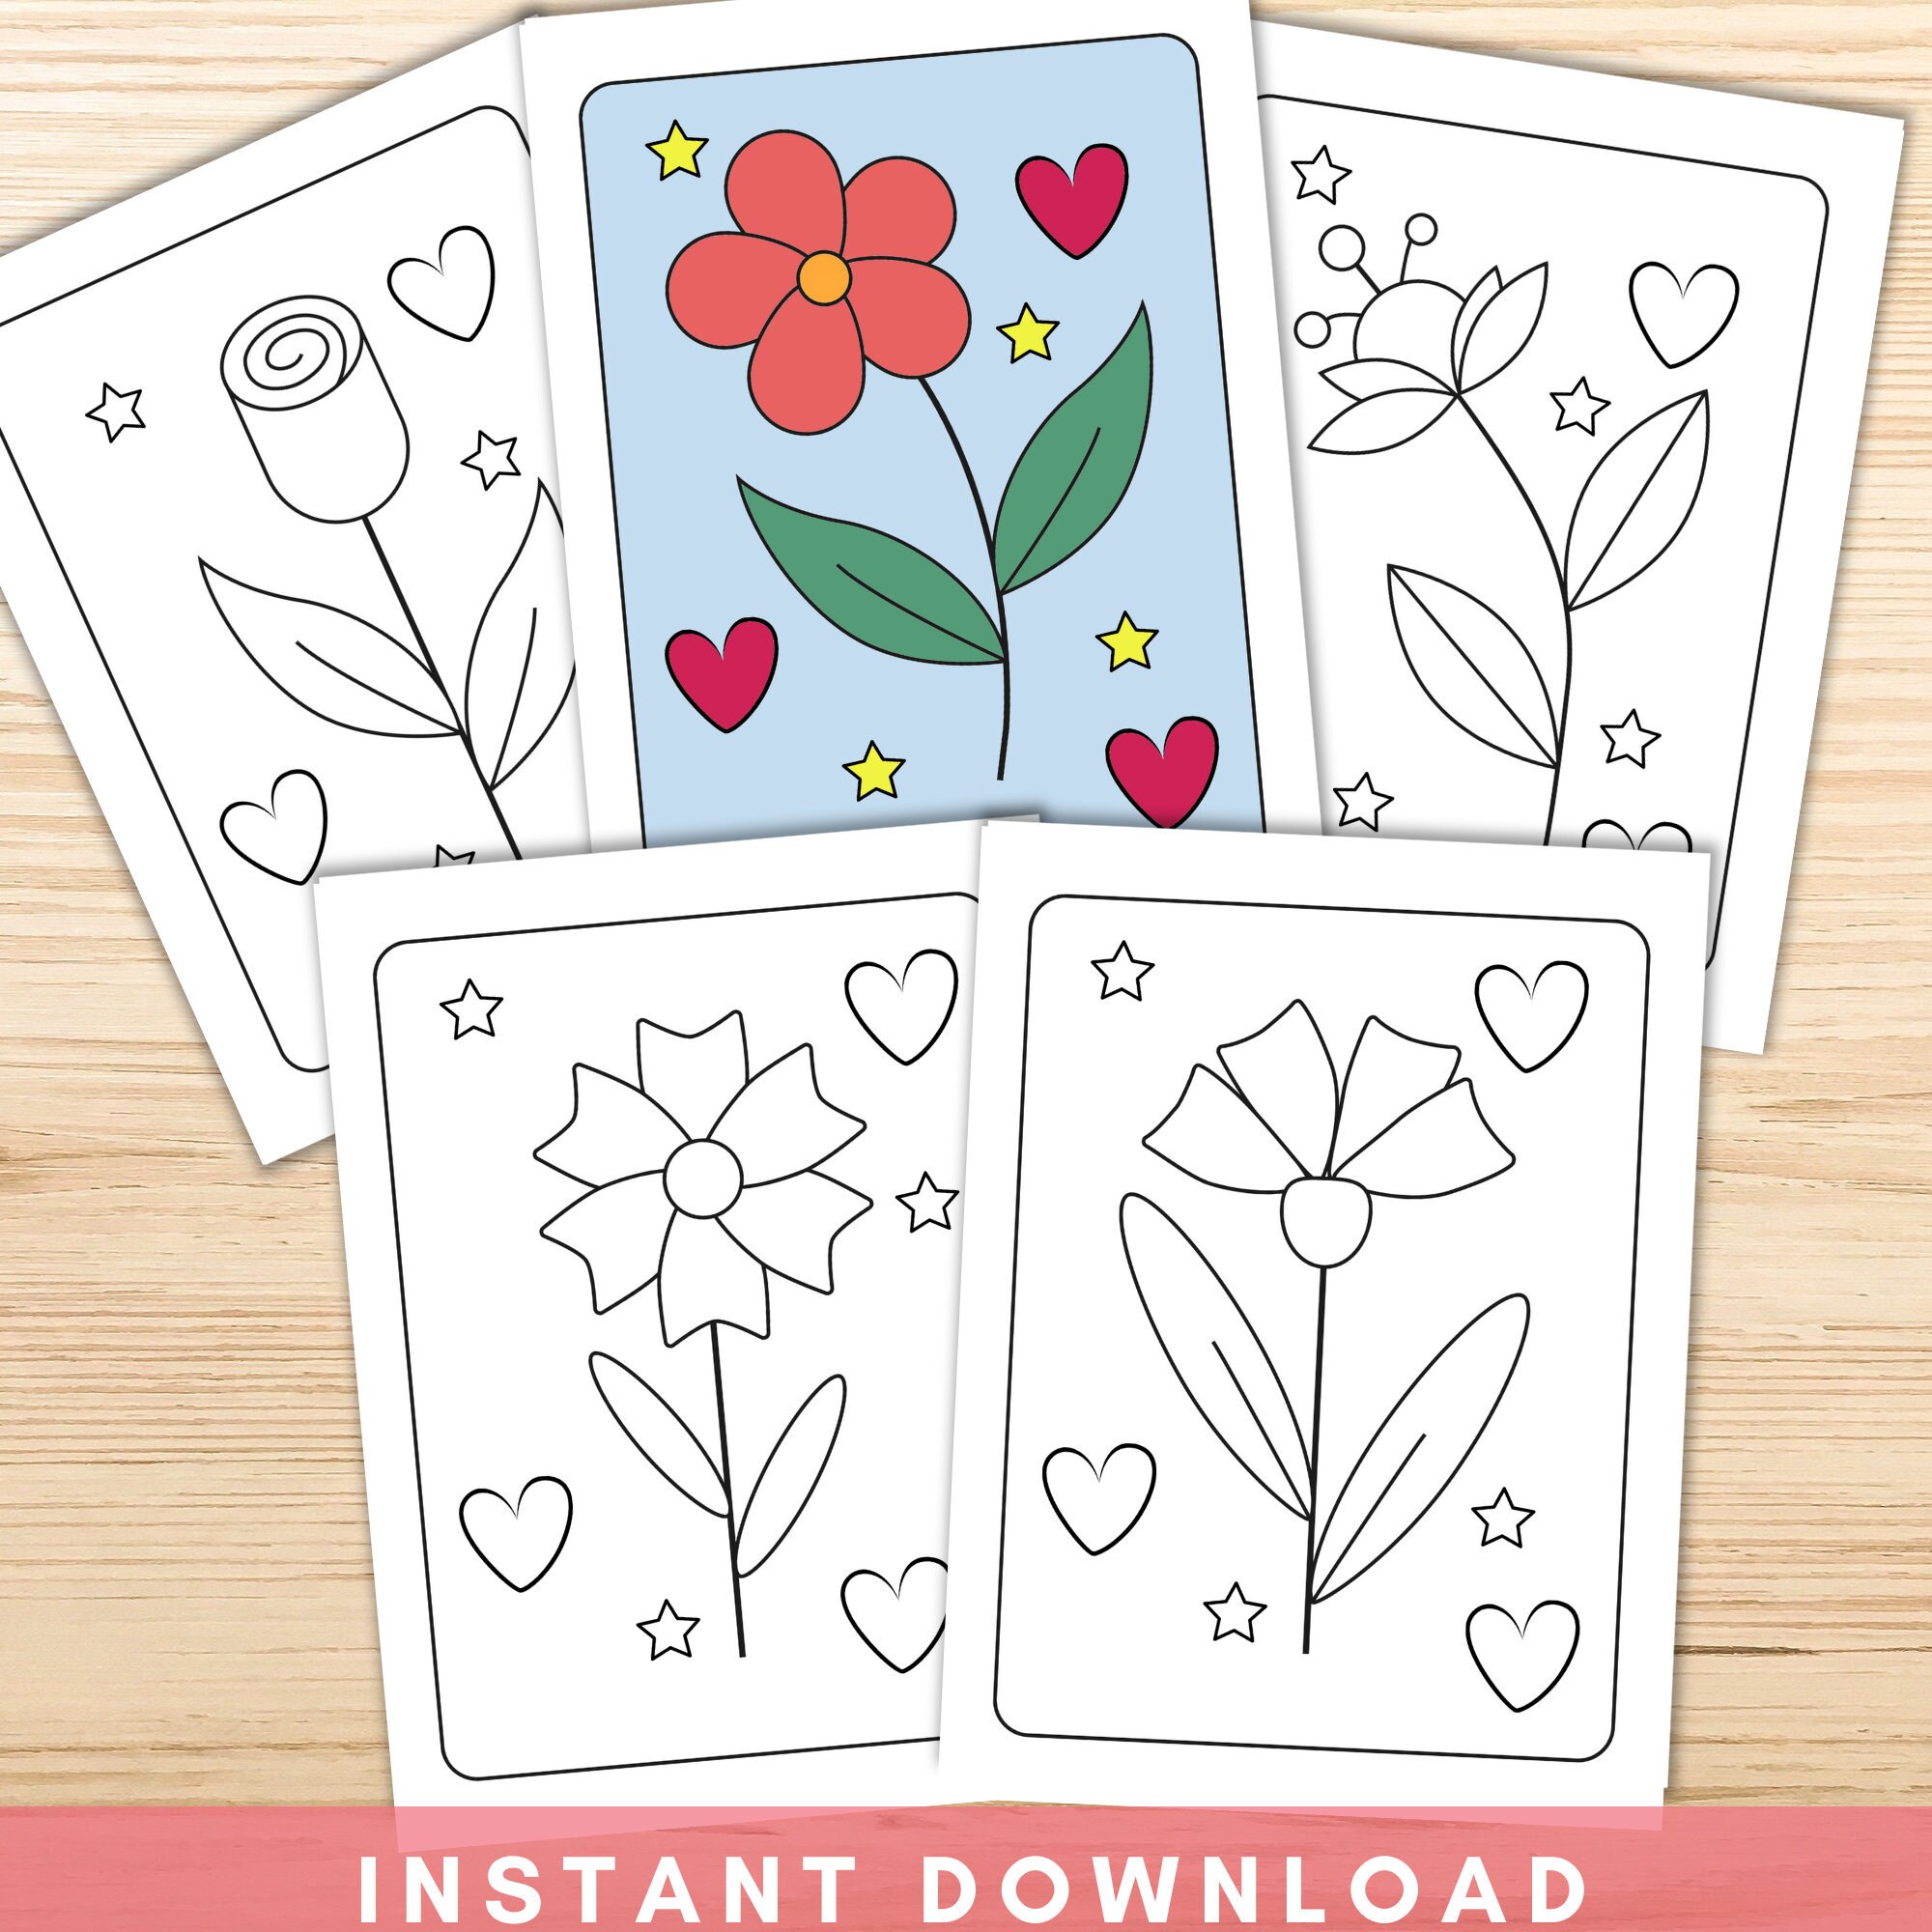 Simple flower coloring pages for kids flower coloring pages flower birthday activity instant download kids coloring book download now